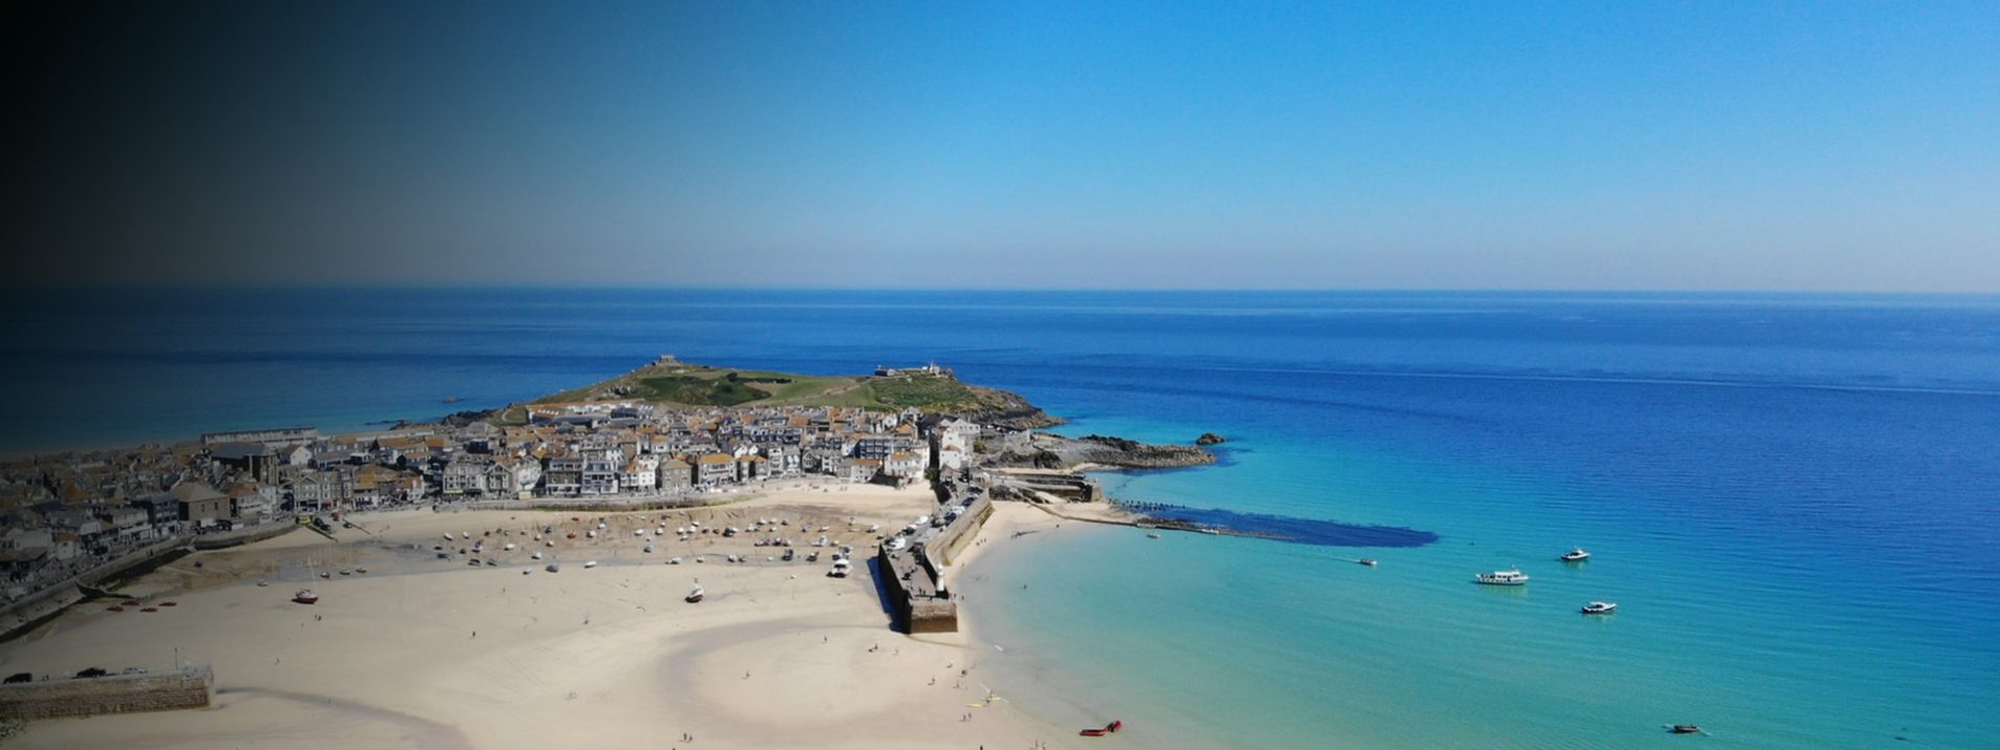 Aerial photograph of St Ives in Cornwall where the G7 summit took place